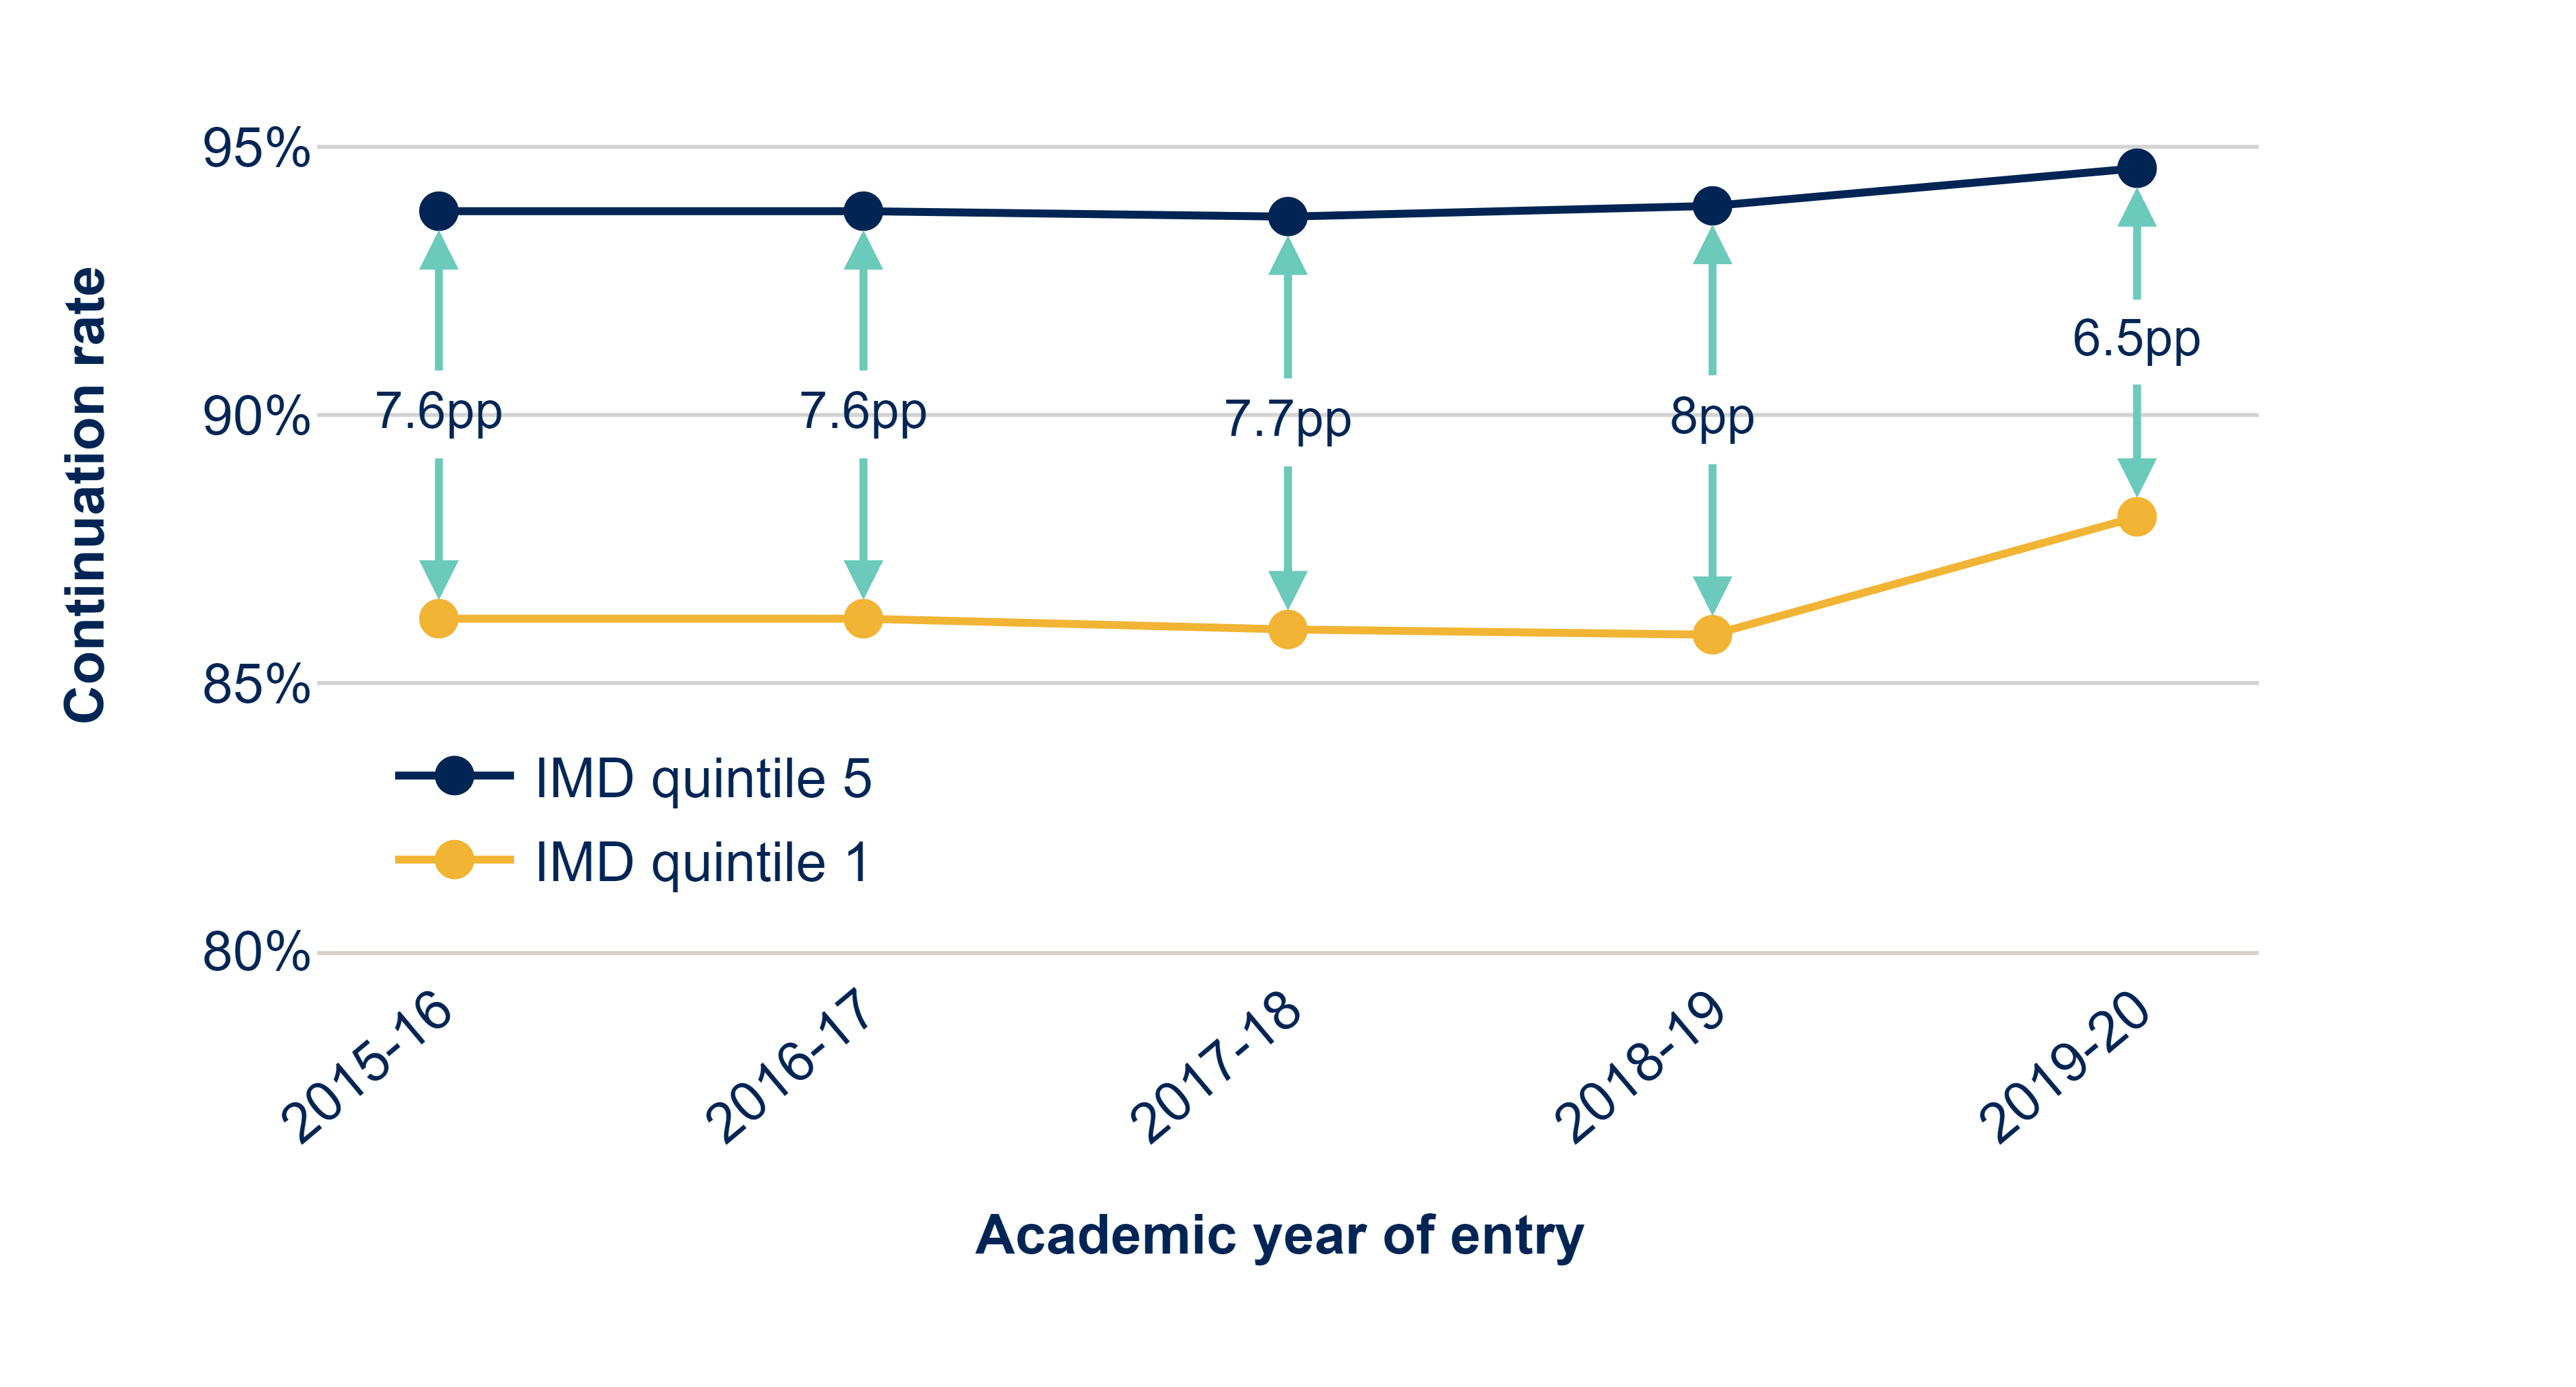 This graph has two lines, one for students from IMD quintile 1 (the most disadvantaged) and one for students from IMD quintile 5 (the least disadvantaged). It shows the continuation rate for the full-time undergraduate students in each of these groups for each year. The bottom line is for students from IMD quintile 1 areas and the rate declines very slightly over the first four years, followed by a noticeable increase in year 5. For those who entered in 2019-20 the rate is 88.1 per cent.  

The other line is for students from IMD quintile 5 areas and is virtually flat for the first 4 years, followed by a small increase in year 5. For those students who entered in 2019-20 the rate is 94.6 per cent. 

The gaps that exist between these two lines gradually increase. For entrants in 2015-16 the gap is 7.6 percentage points and for entrants in 2019-20 the gap is 6.5 percentage points.